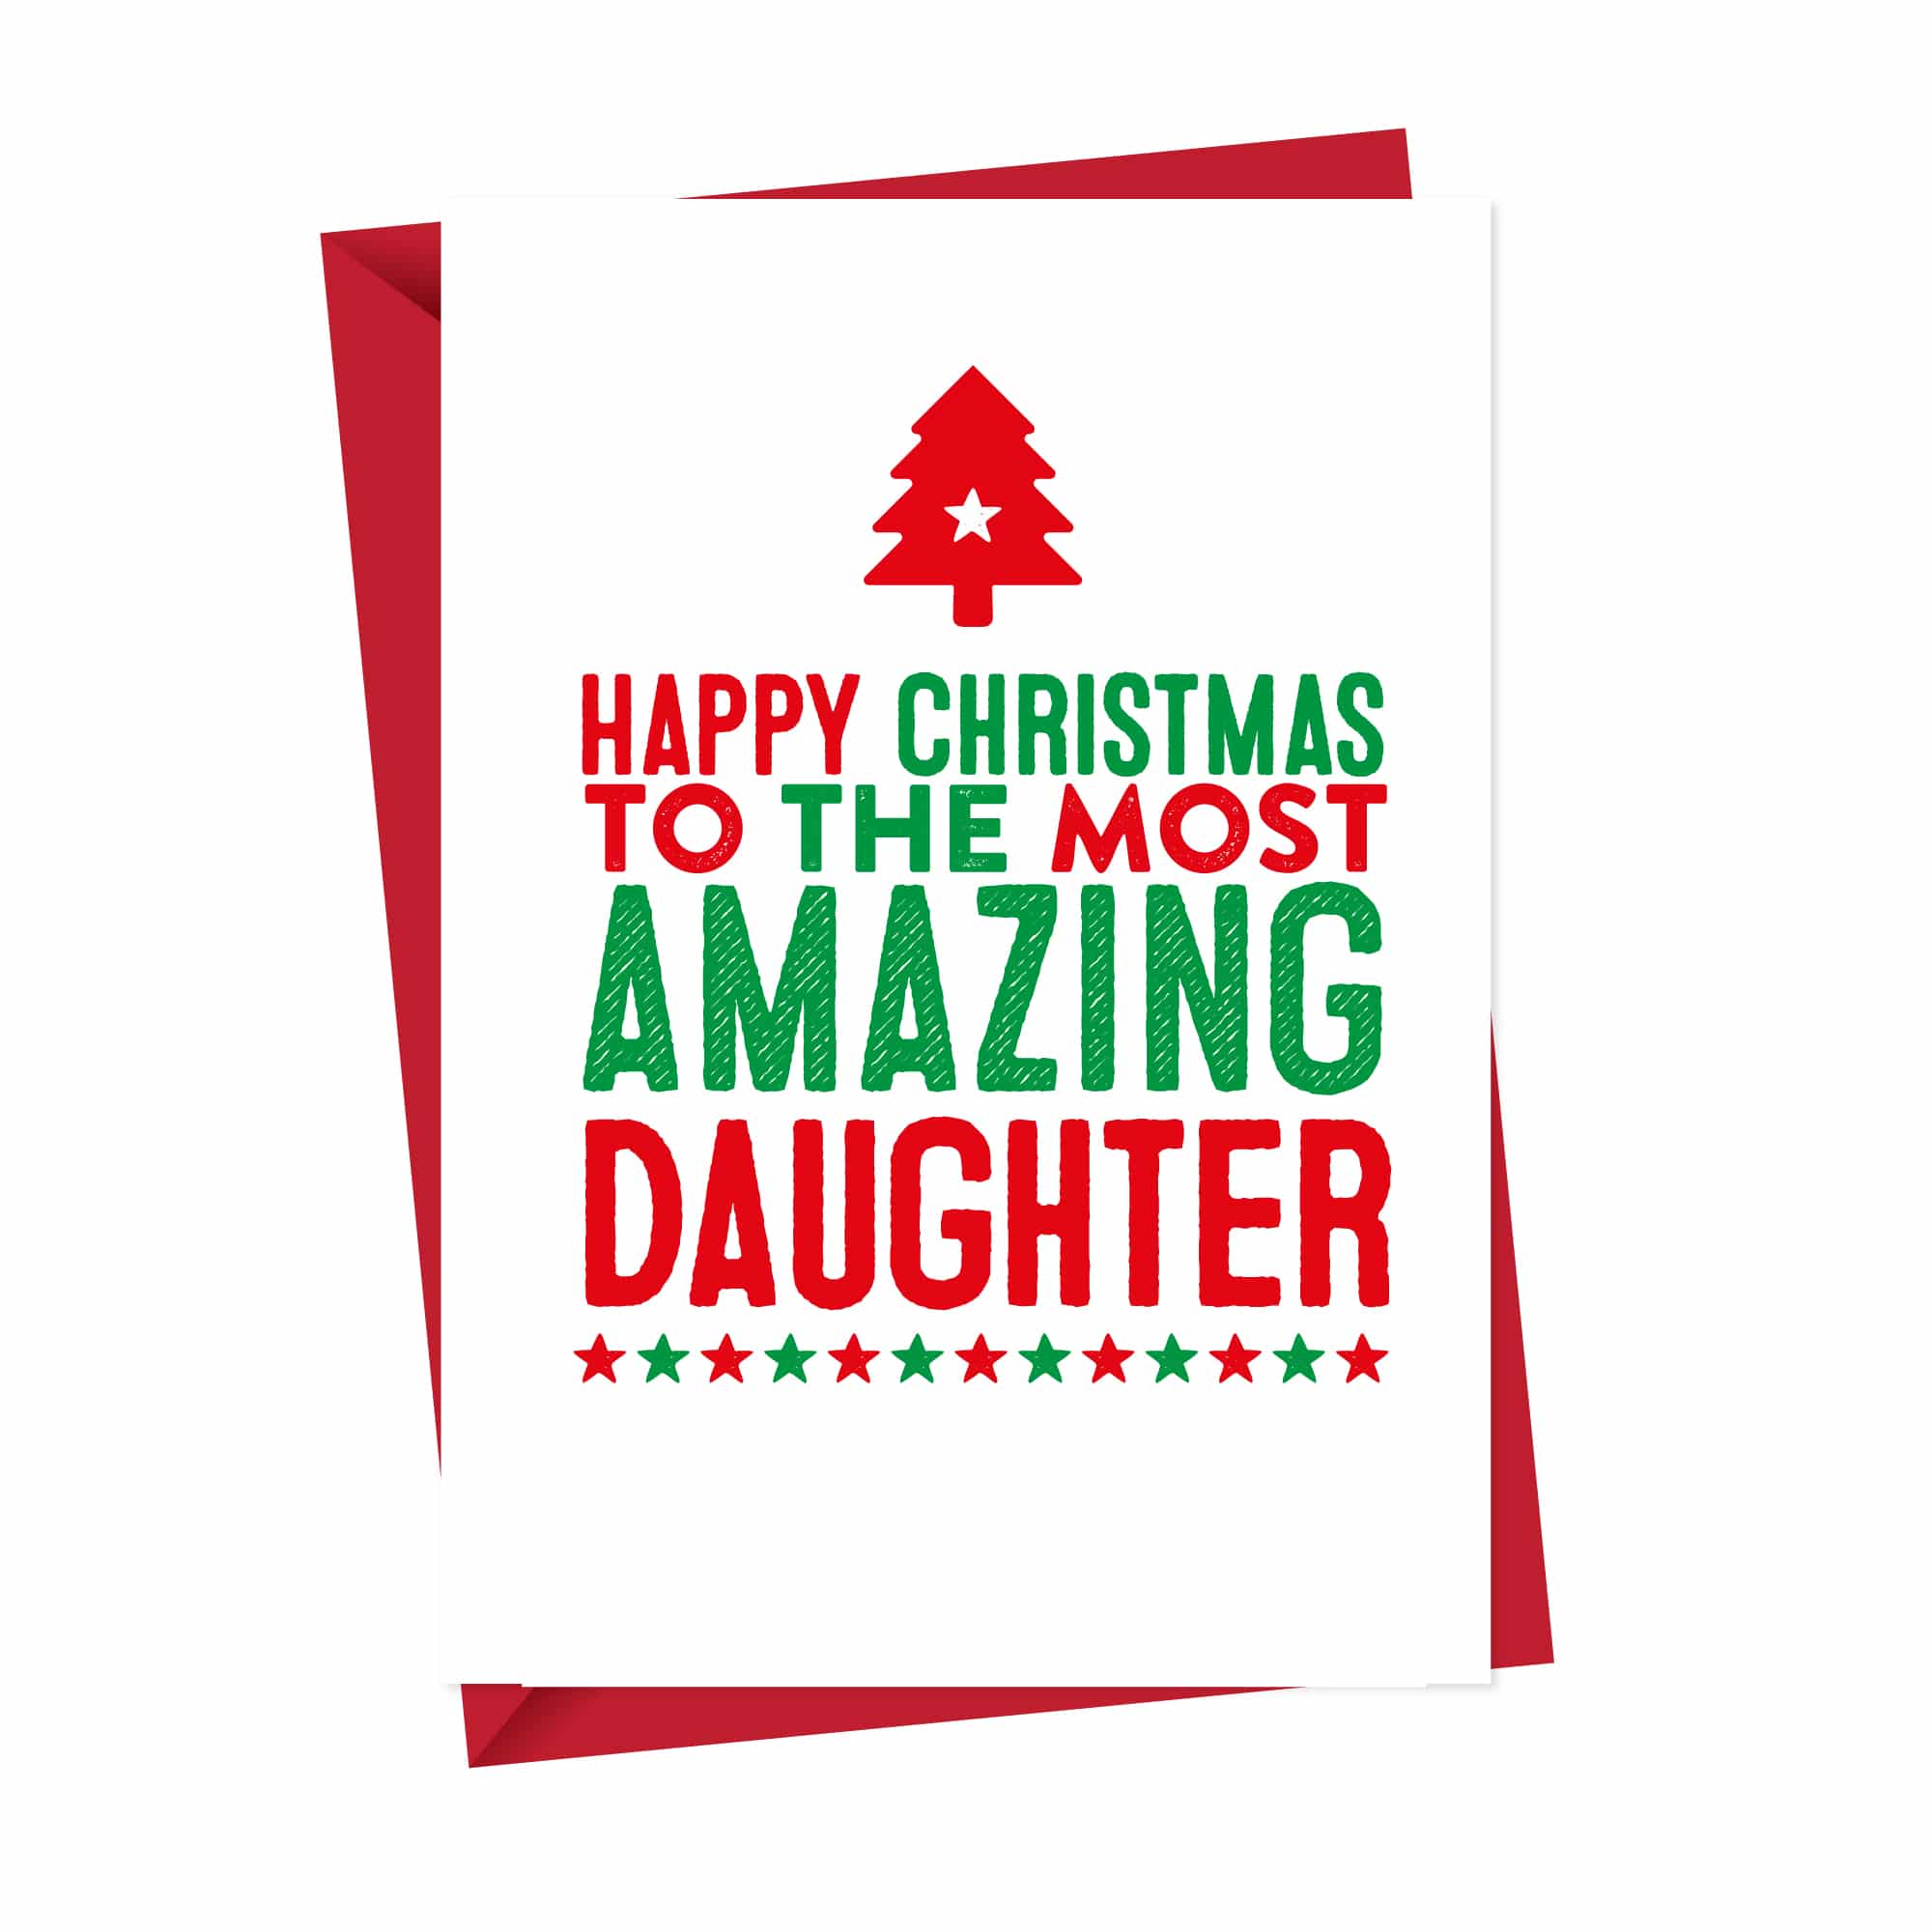 Amazing Daughter Christmas Card